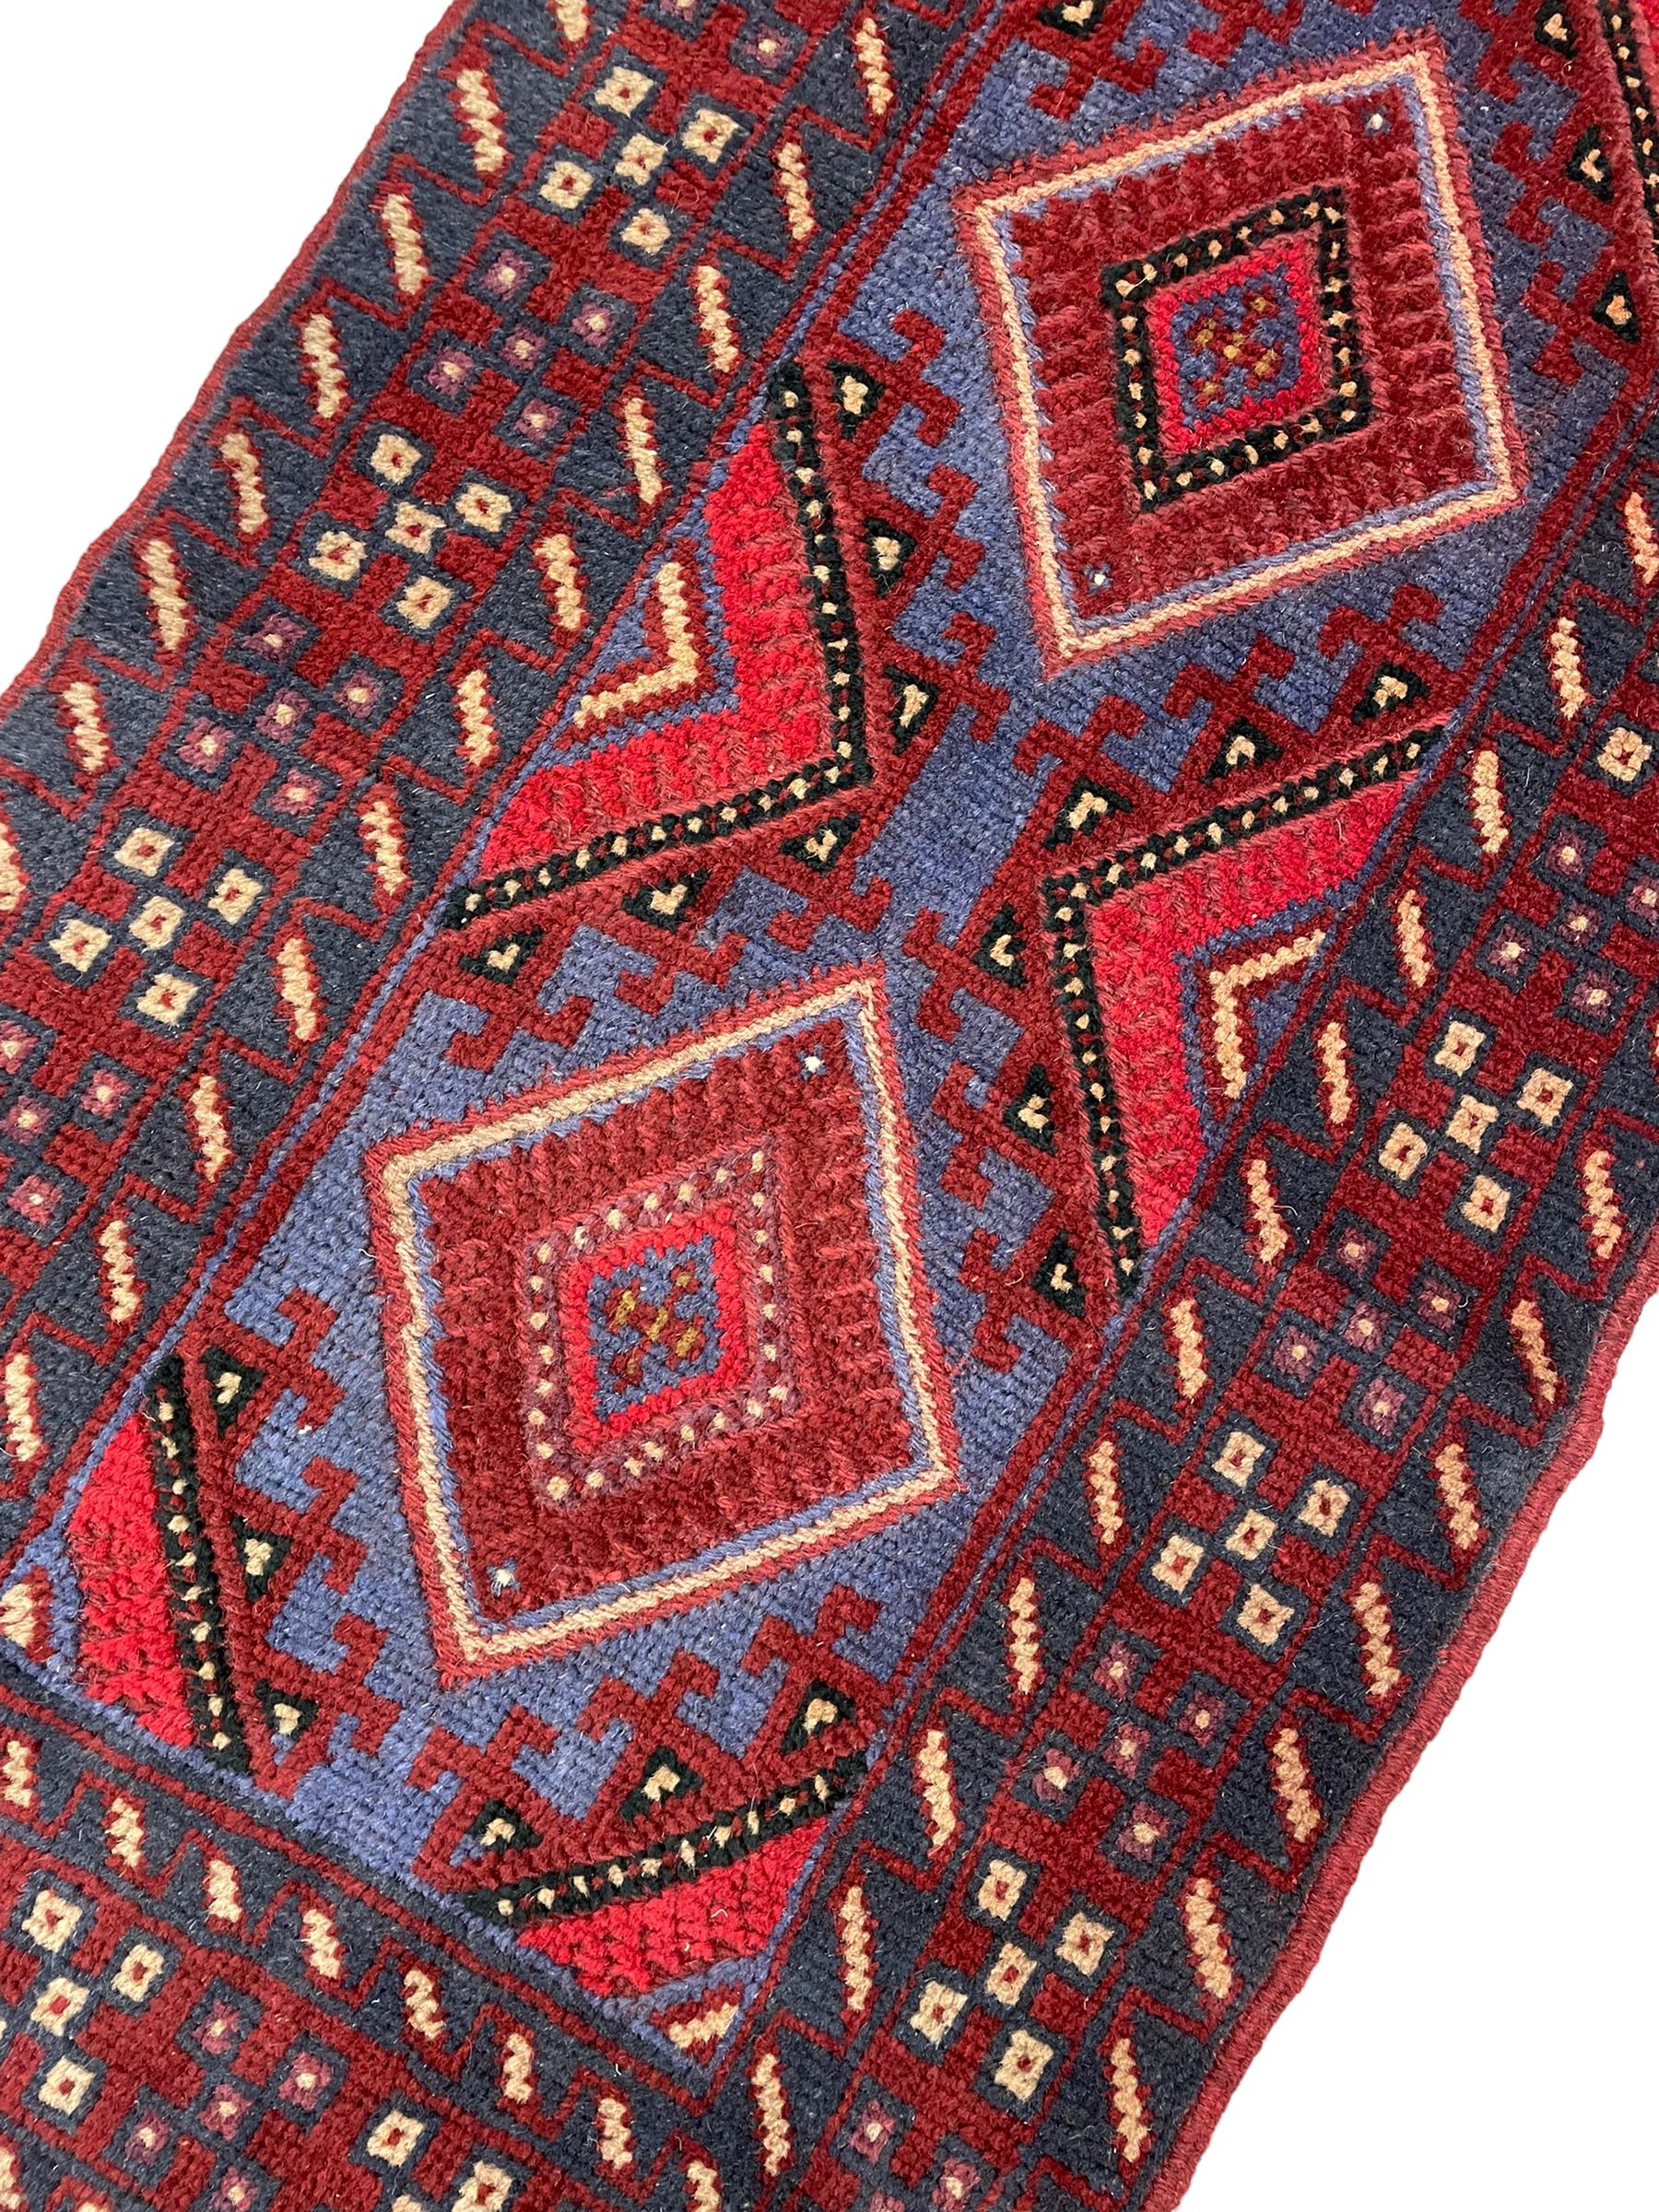 Meshwani red and blue ground runner - Image 4 of 5